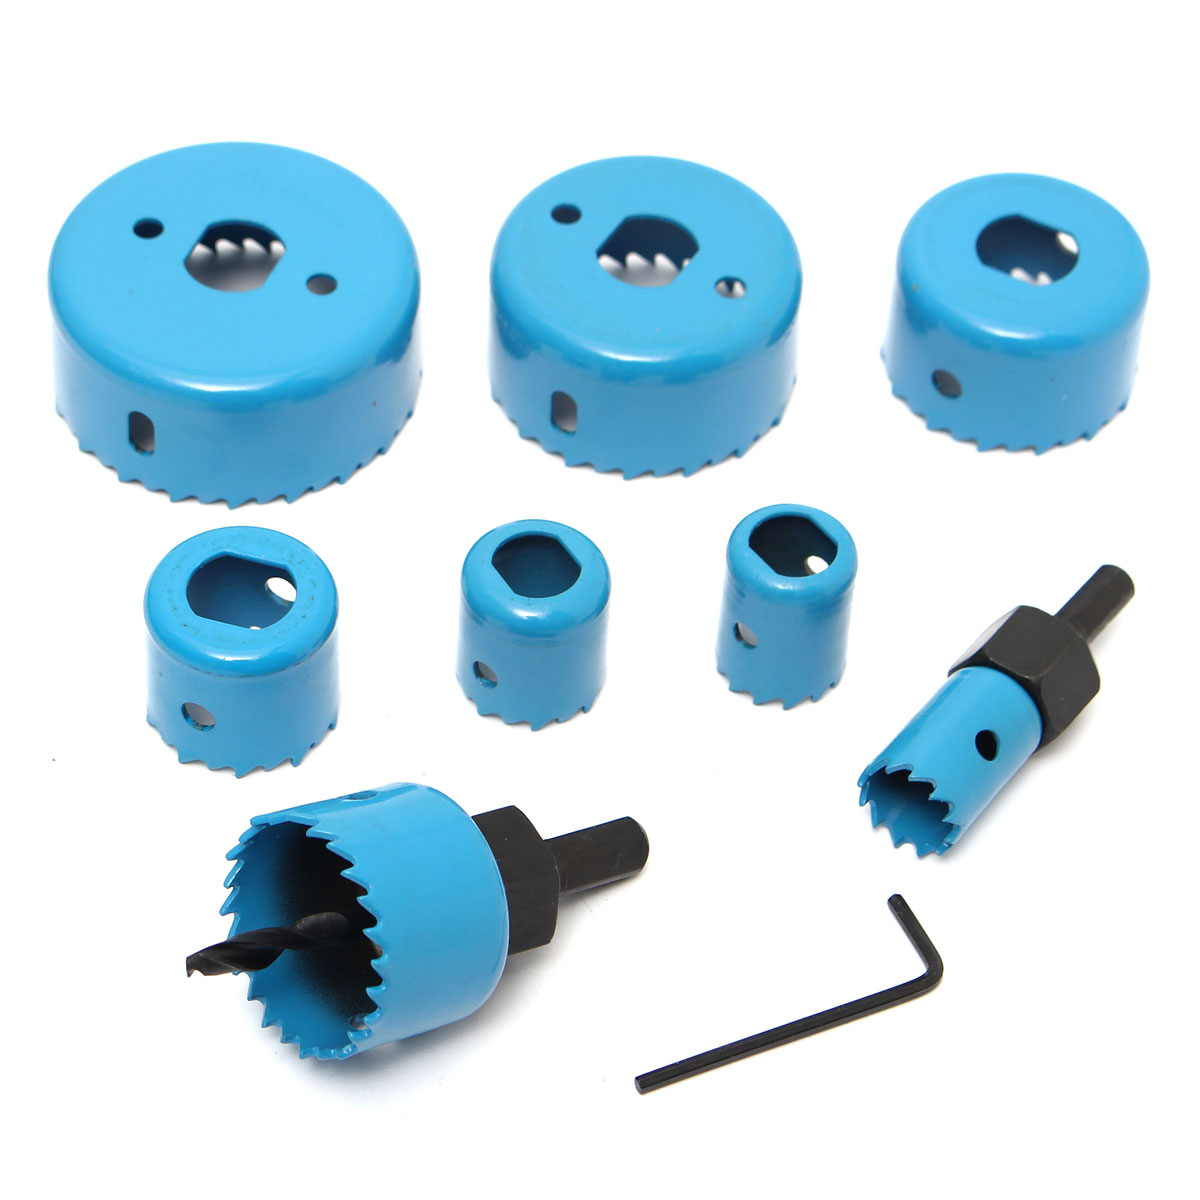 8pcs-Blue-Hole-Saw-Cutter-Set-with-Hex-Wrench-Wood-Alloy-Iron-Cutter-for-Woodworking-1554163-4